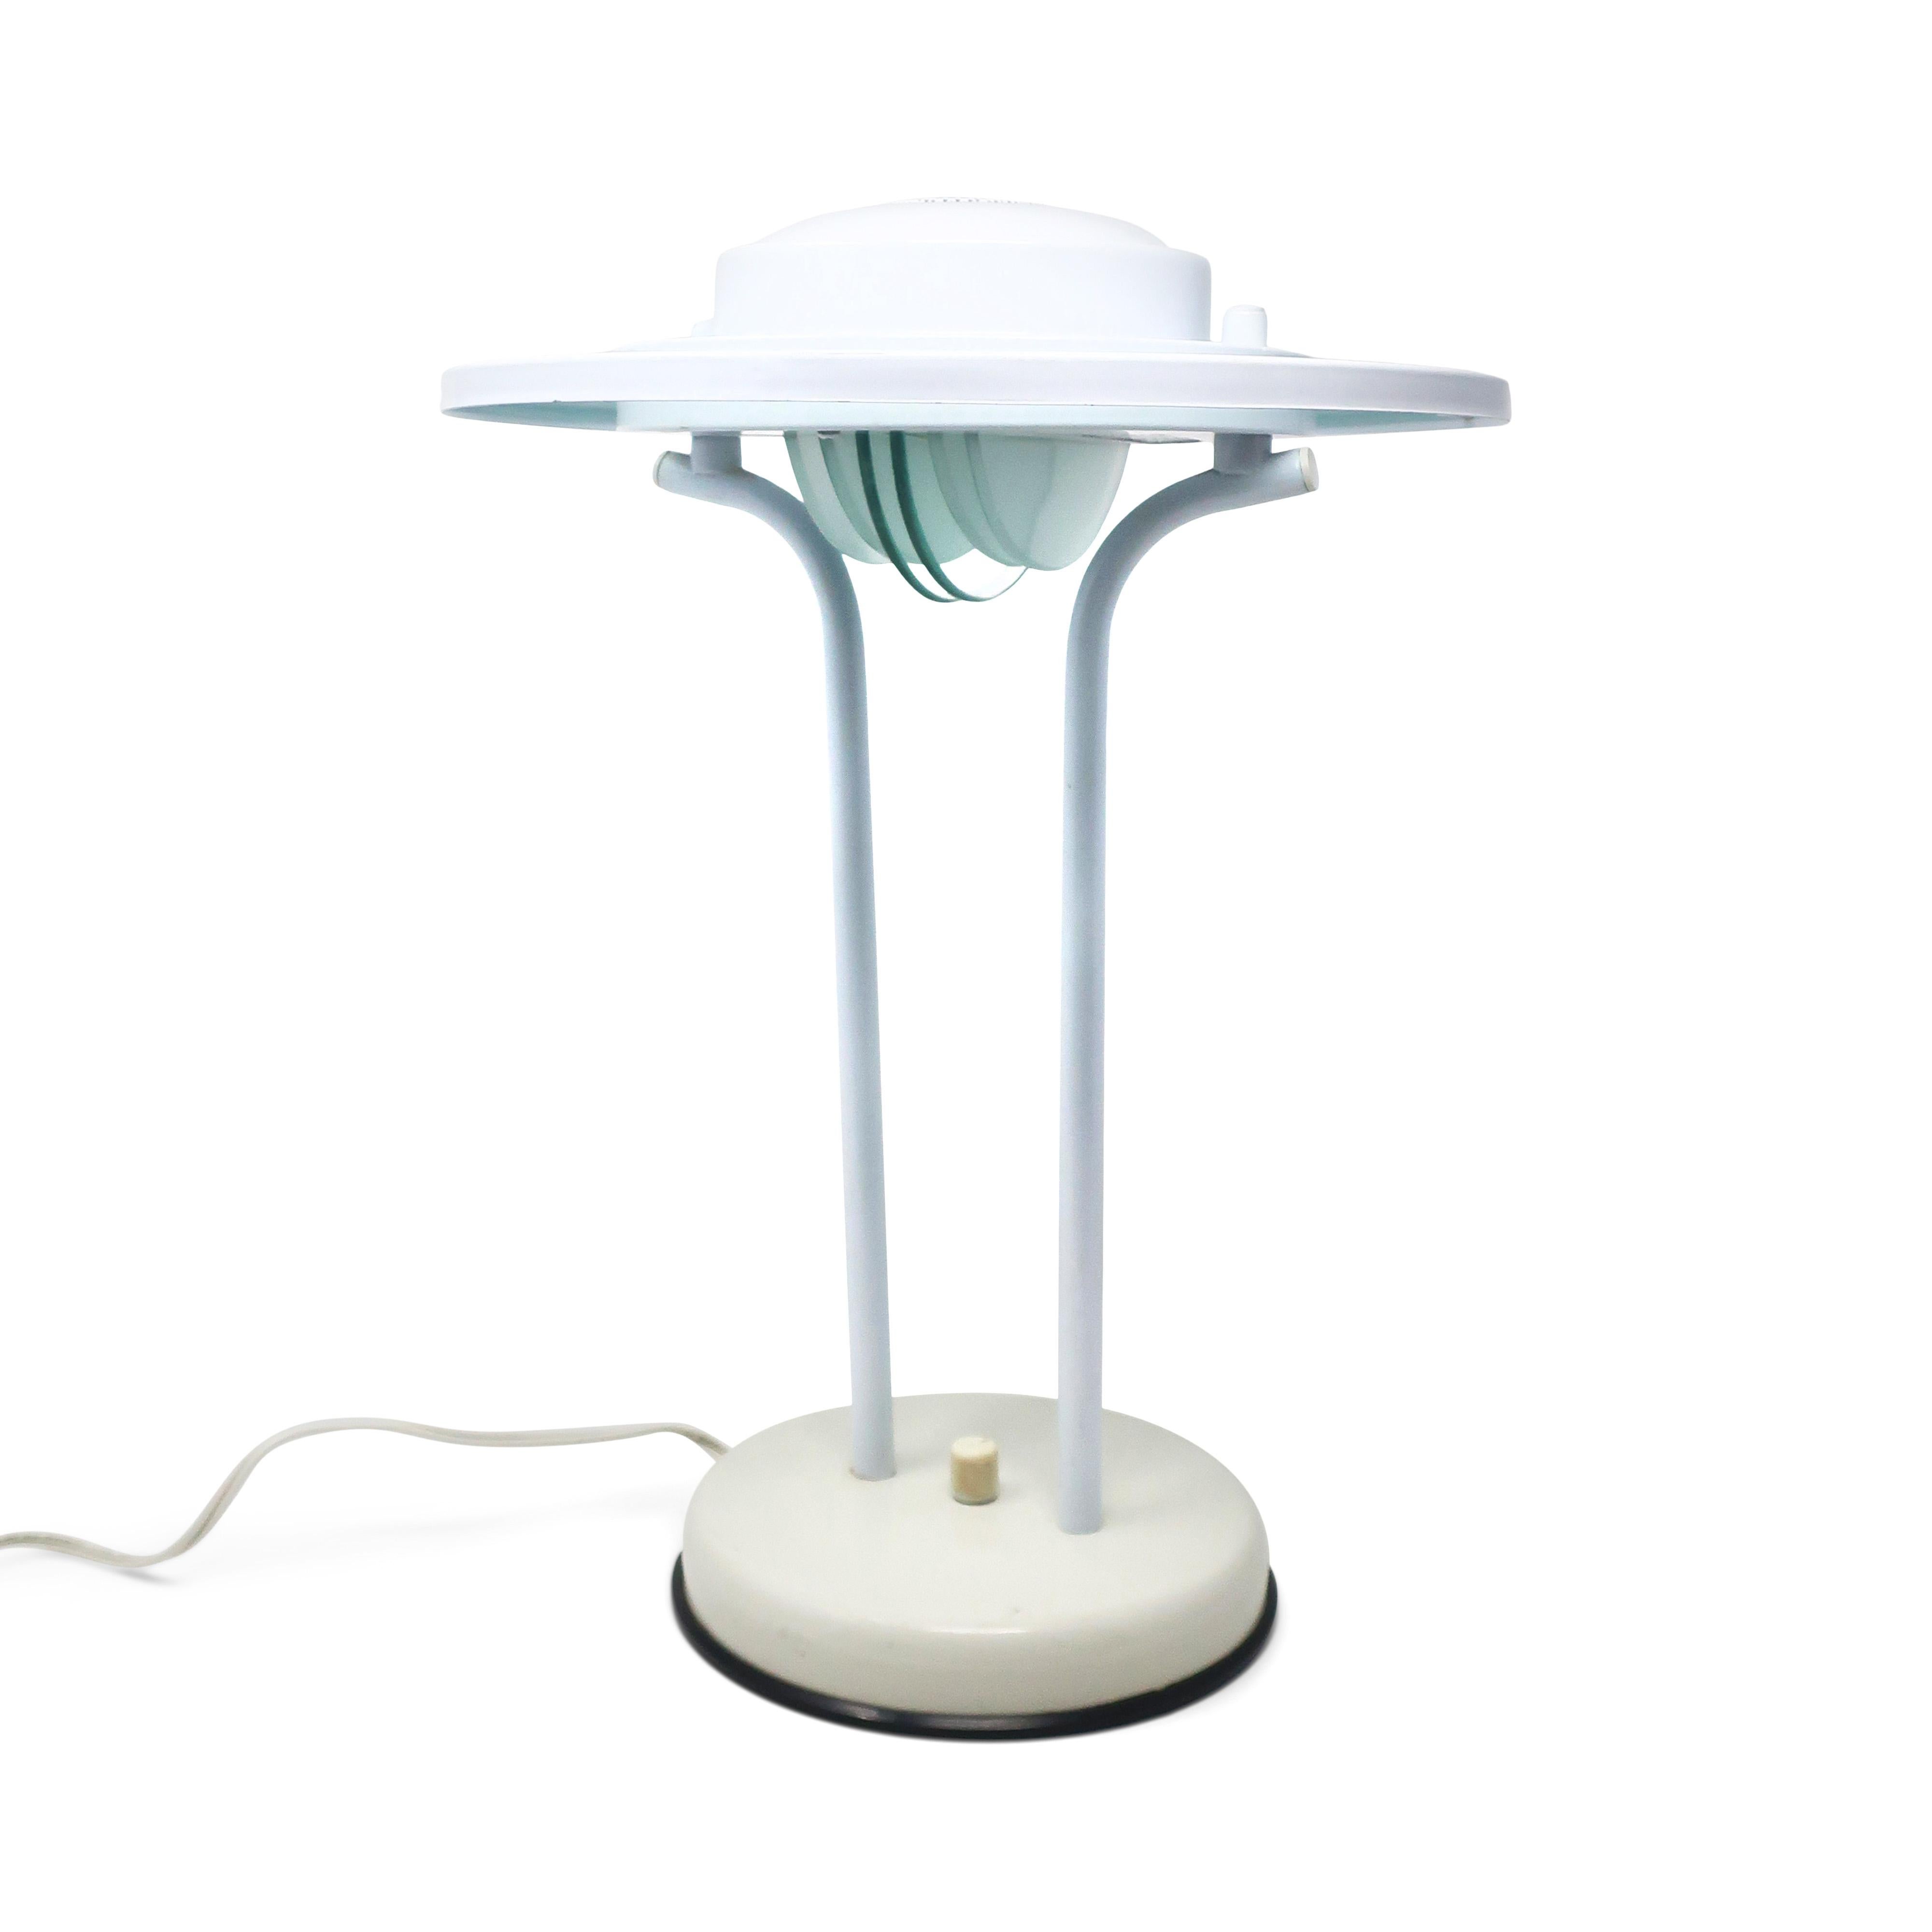 A lovely postmodern flying saucer table lamp by Nadair, a Canadian lighting company, in the style of Robert Sonneman and George Kovacs. White enamled metal base, upright supports, and shade, half circle glass accents hanging below the bulb and a